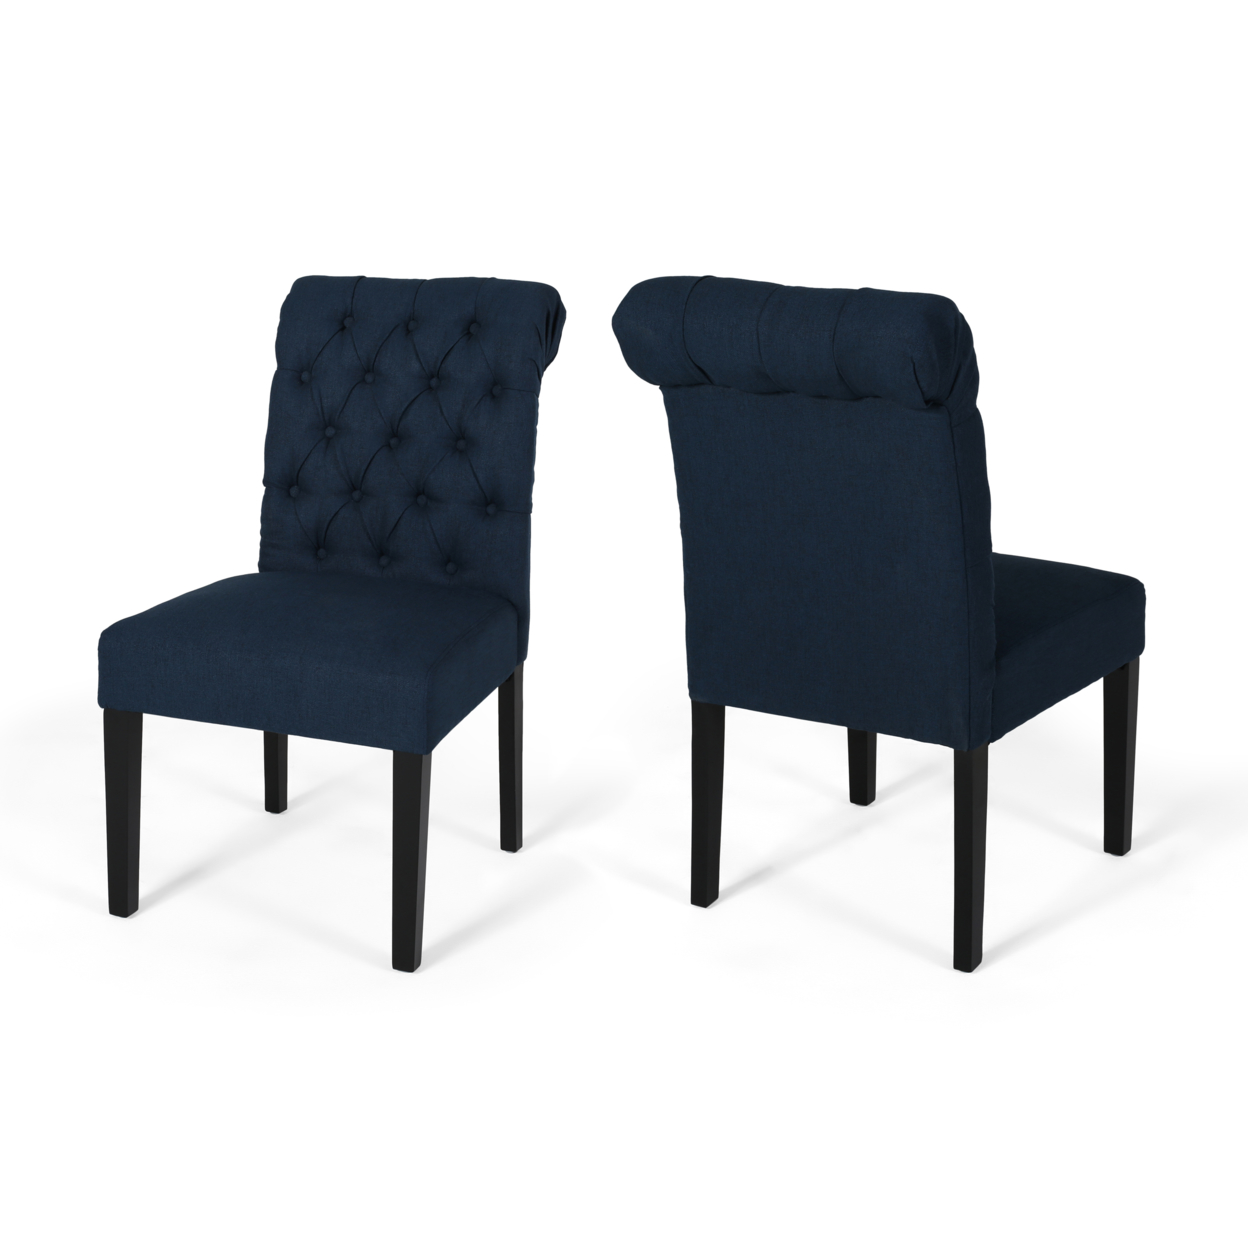 Maci Tufted Rolltop Dining Chairs (Set Of 2) - Navy Blue + Matte Black Finish